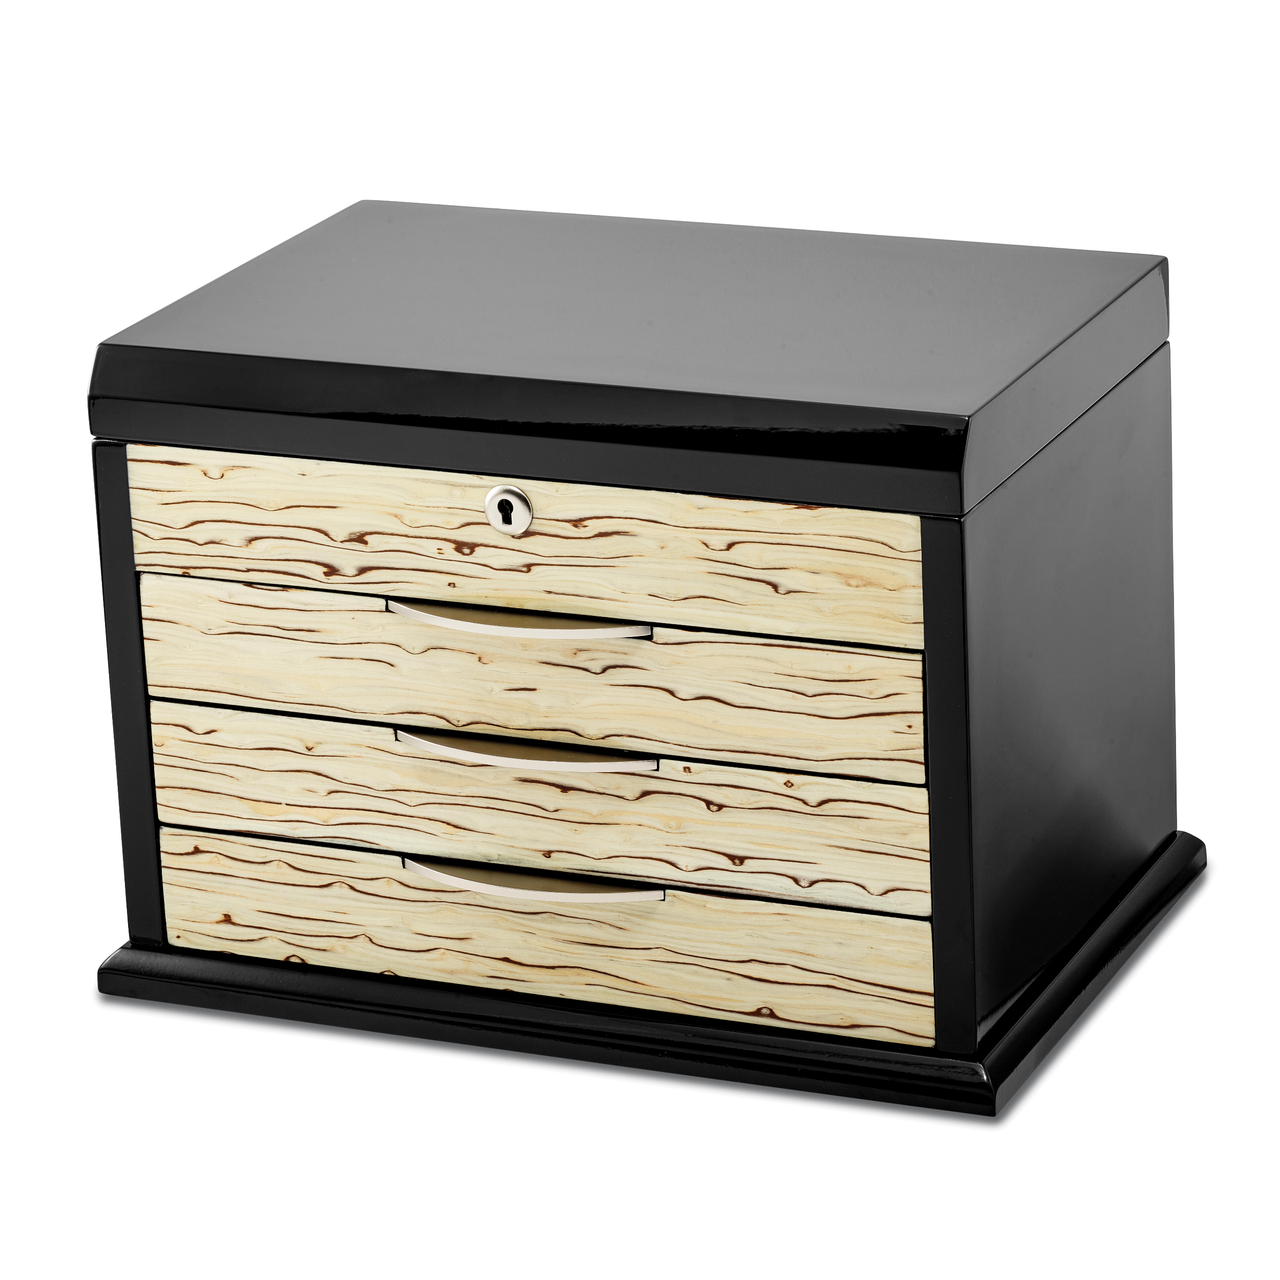 Black Oak Veneer with Iced Maple Veneer Front Jewelry Chest by Jere